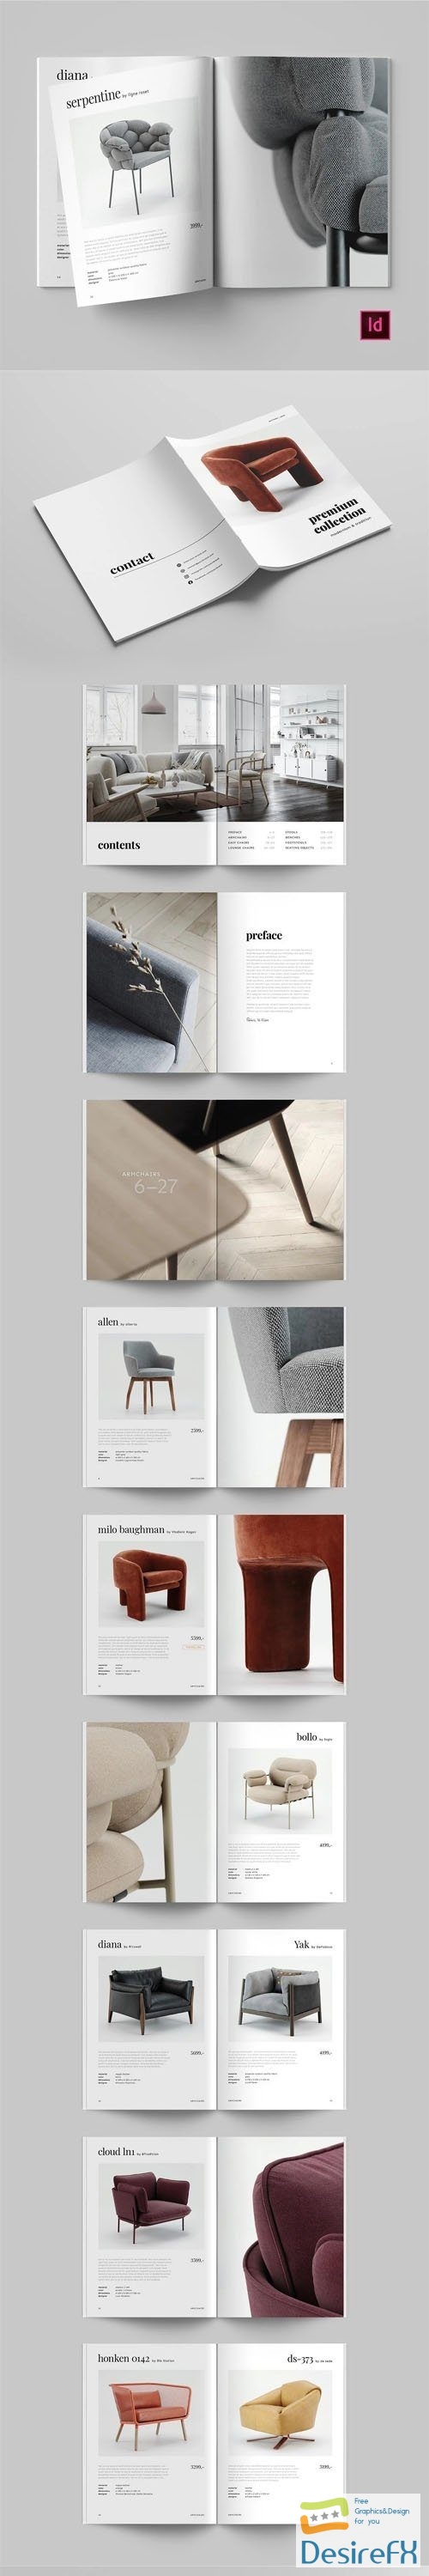 Product Brochure Indesign INDD Template A4/US Letter